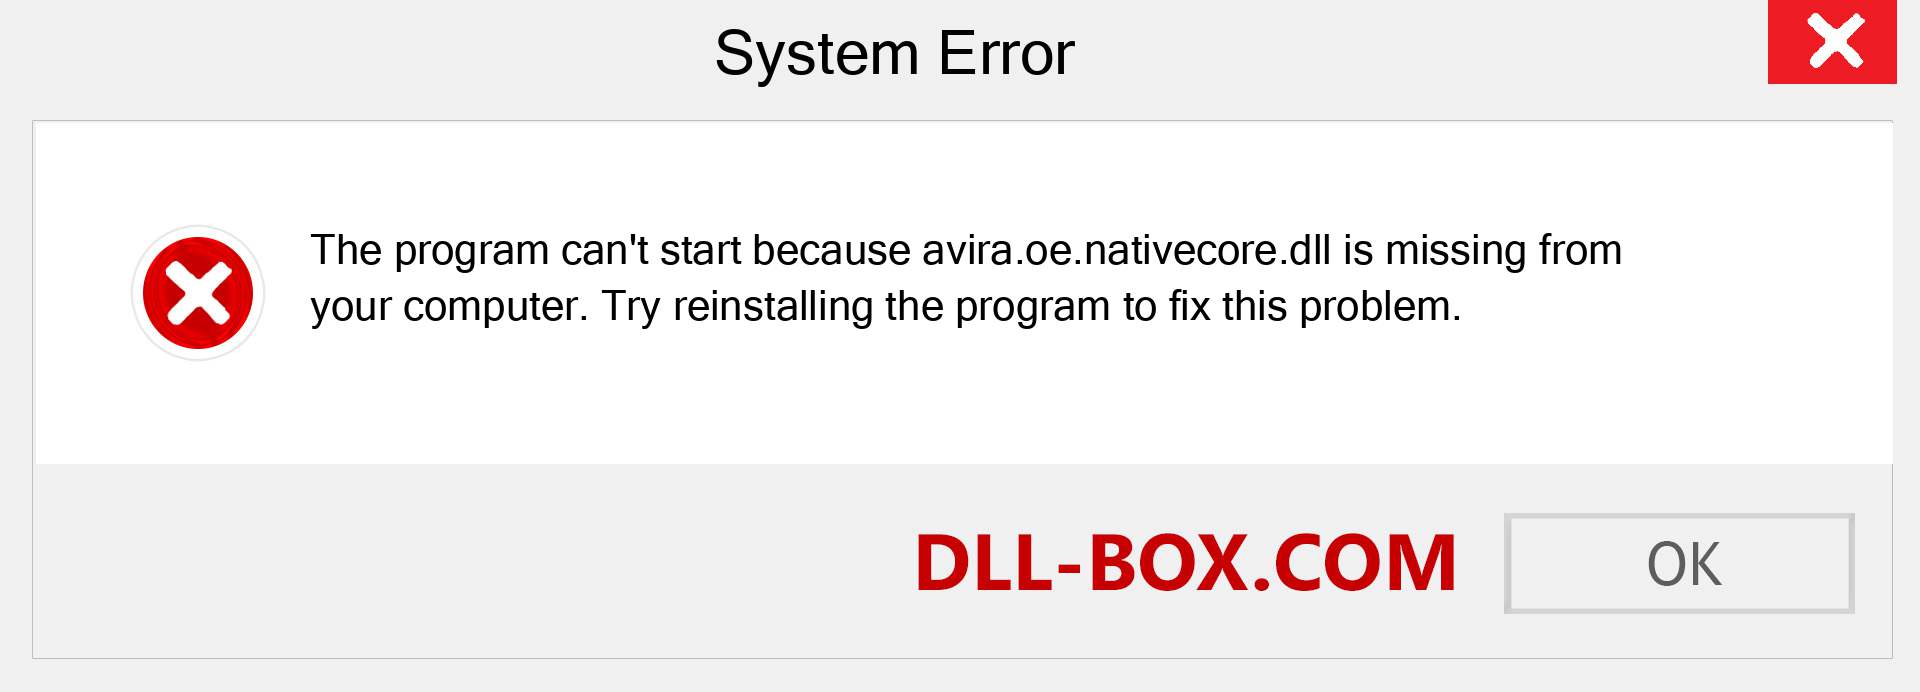  avira.oe.nativecore.dll file is missing?. Download for Windows 7, 8, 10 - Fix  avira.oe.nativecore dll Missing Error on Windows, photos, images